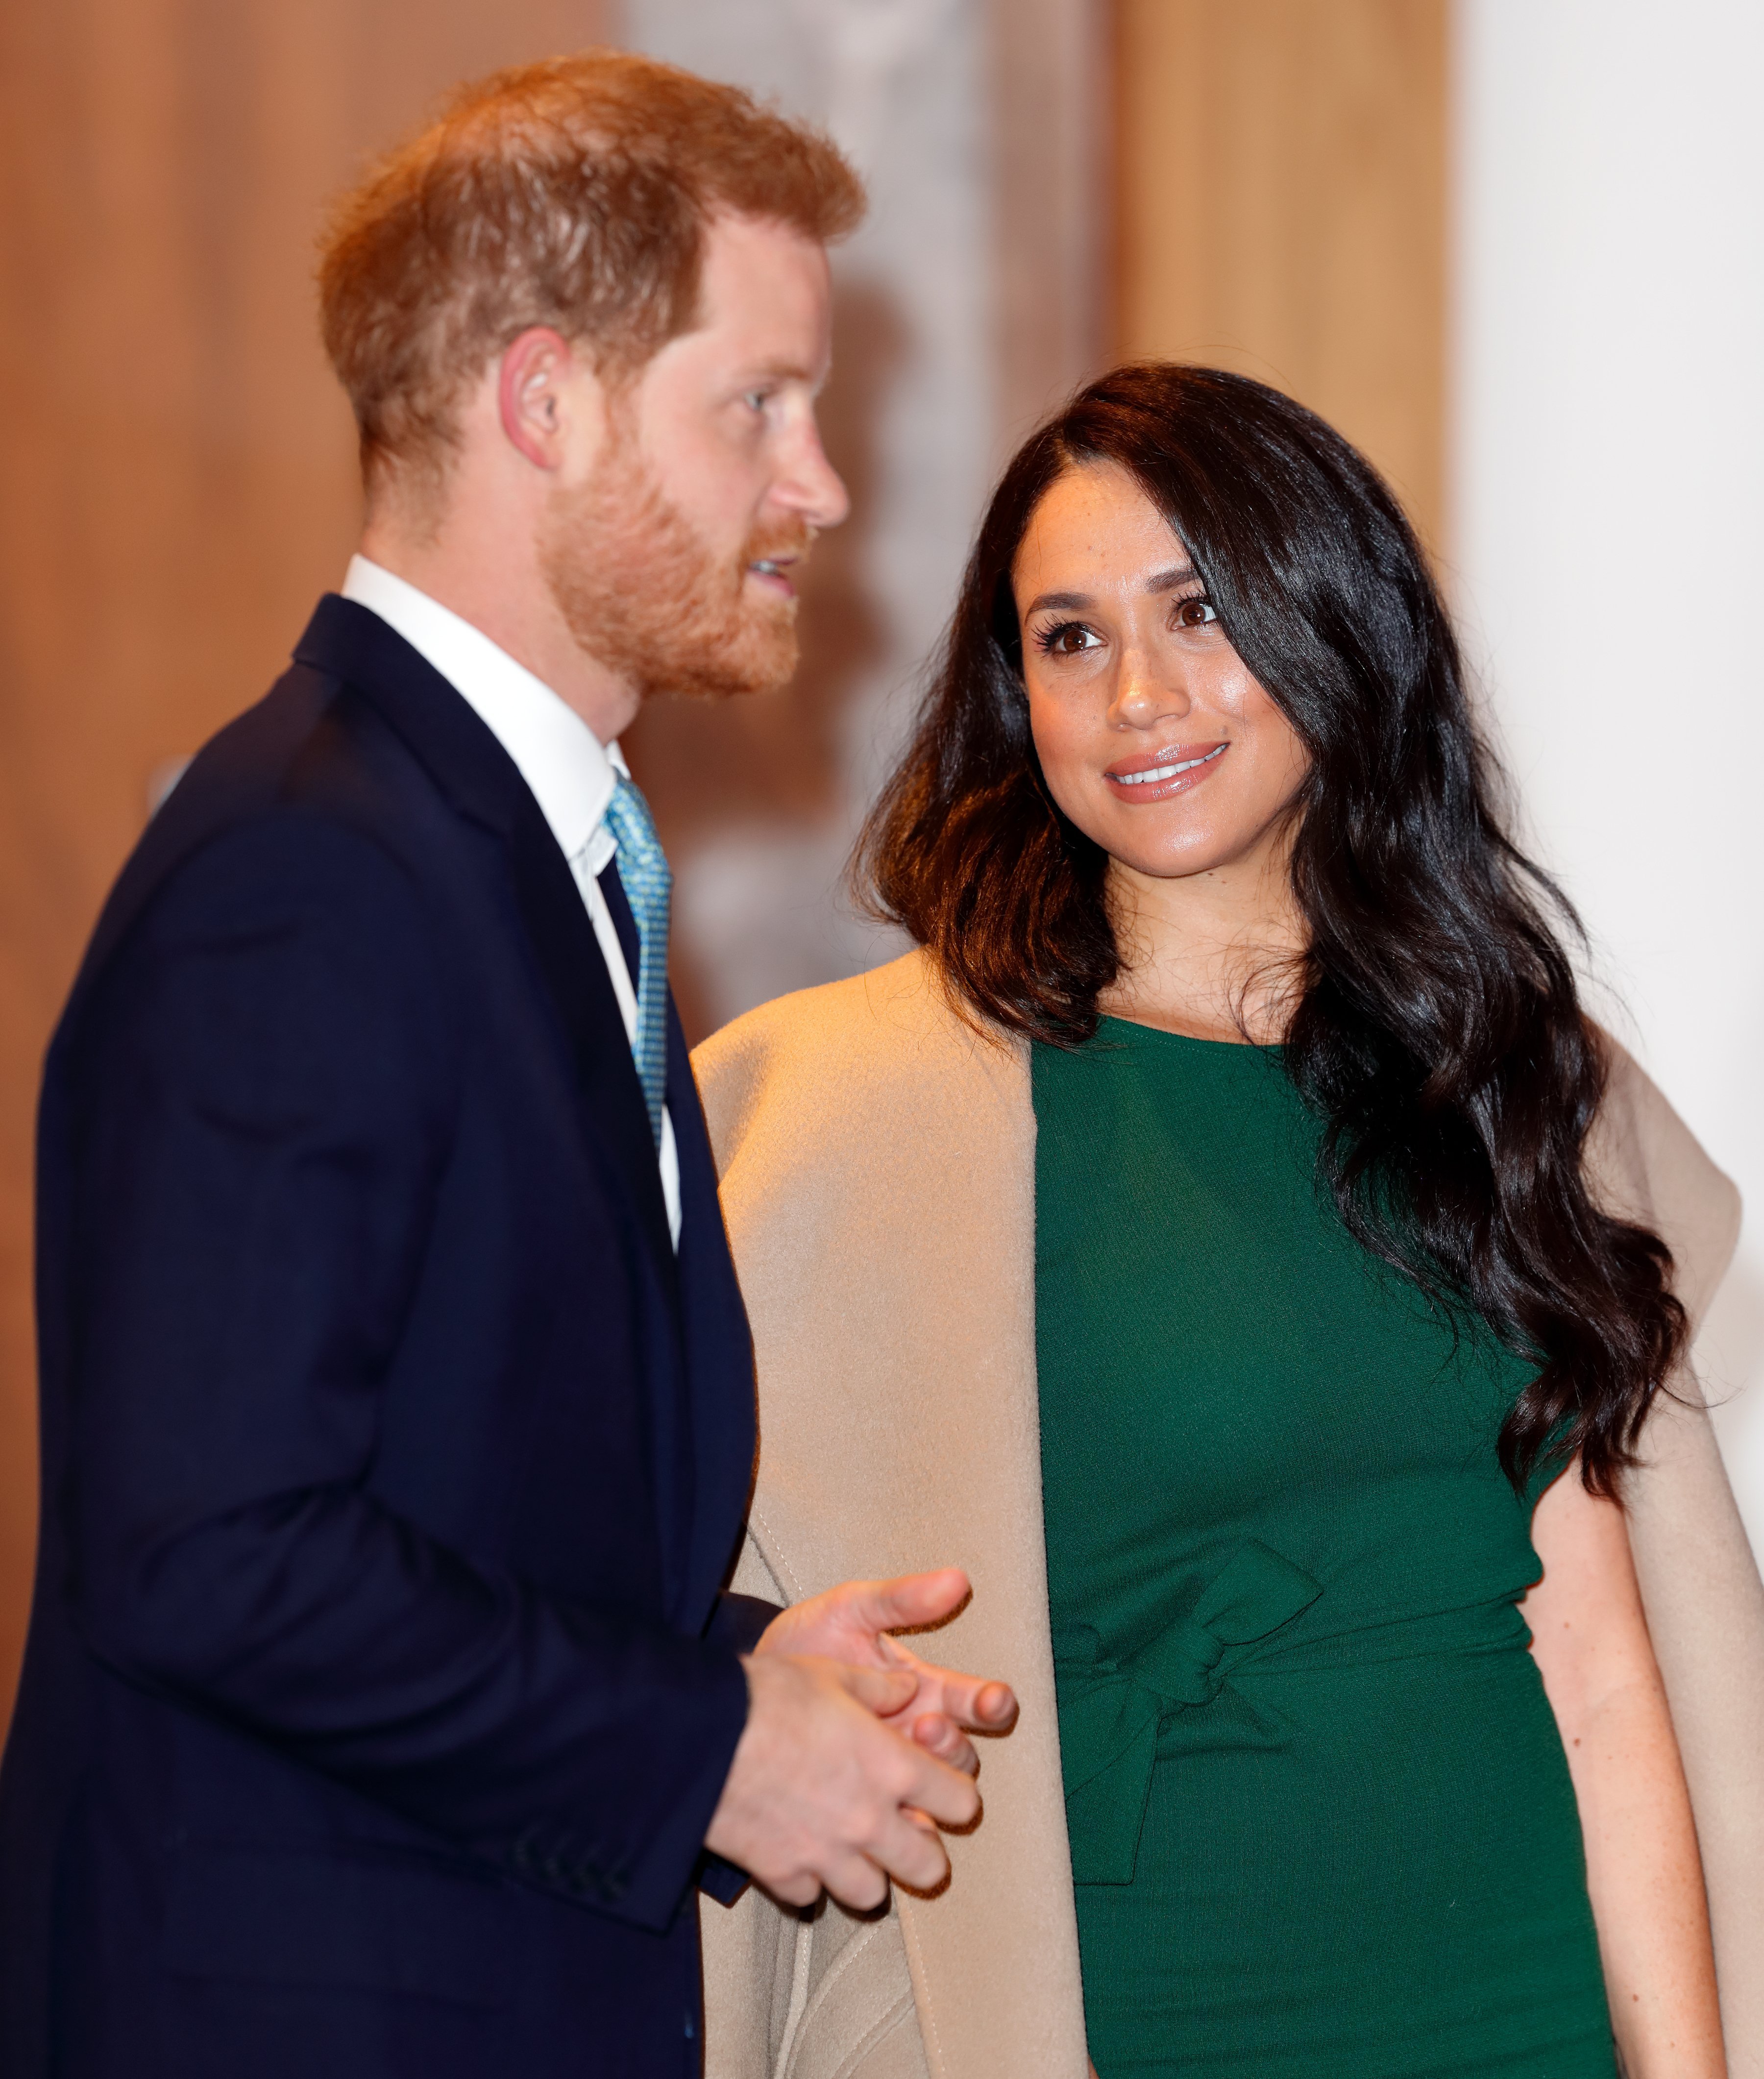 Prince Harry & Meghan Markle at the WellChild awards on Oct. 15, 2019 in London, England | Photo: Getty Images